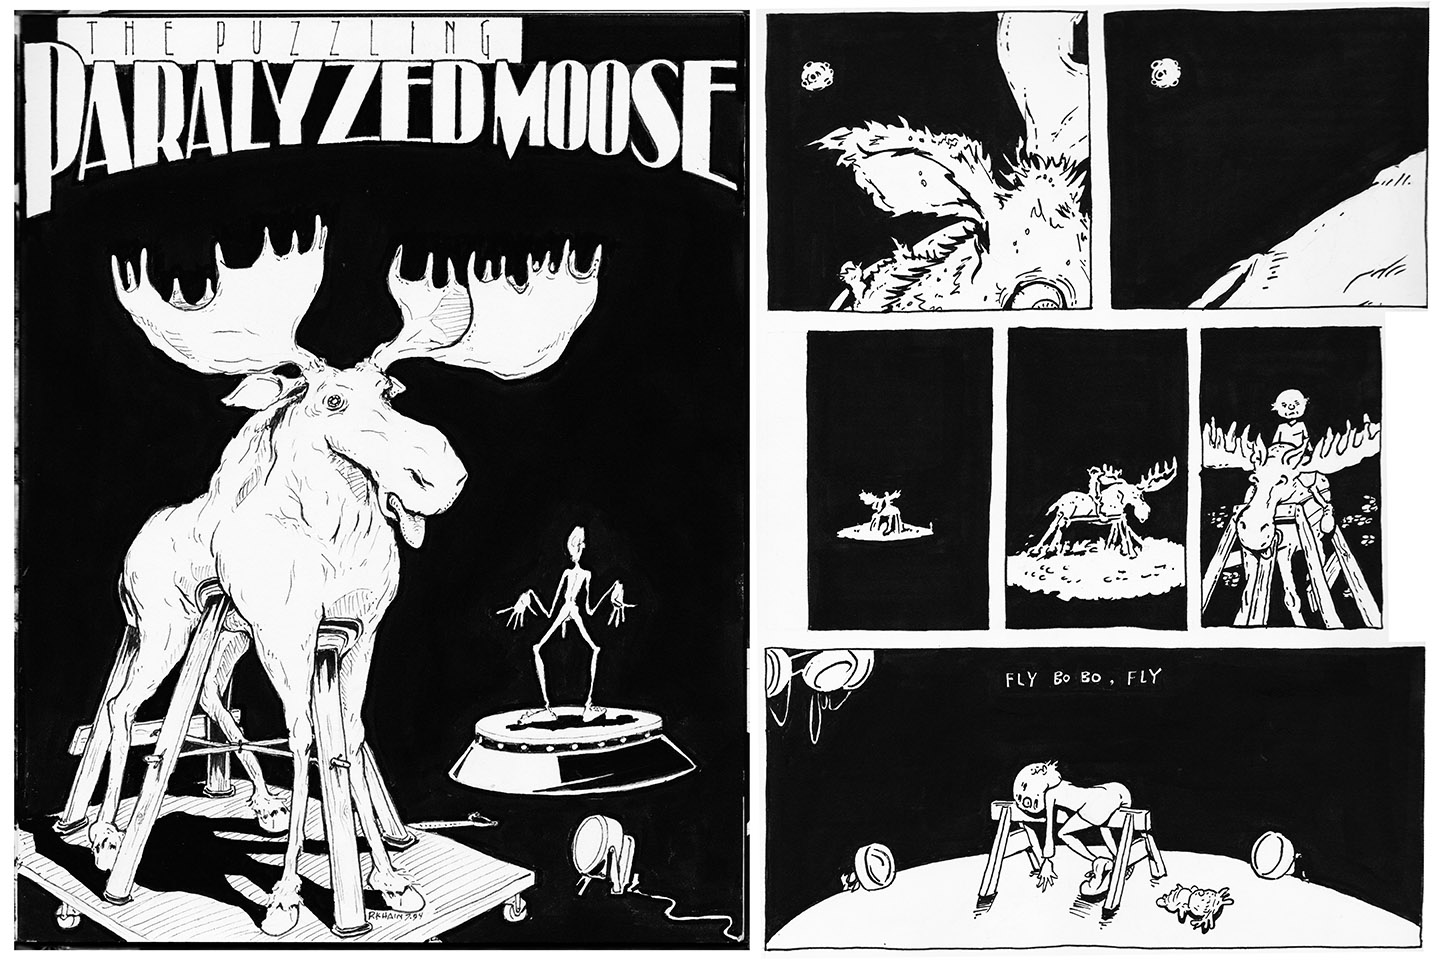 The Puzzling Paralyzed Moose